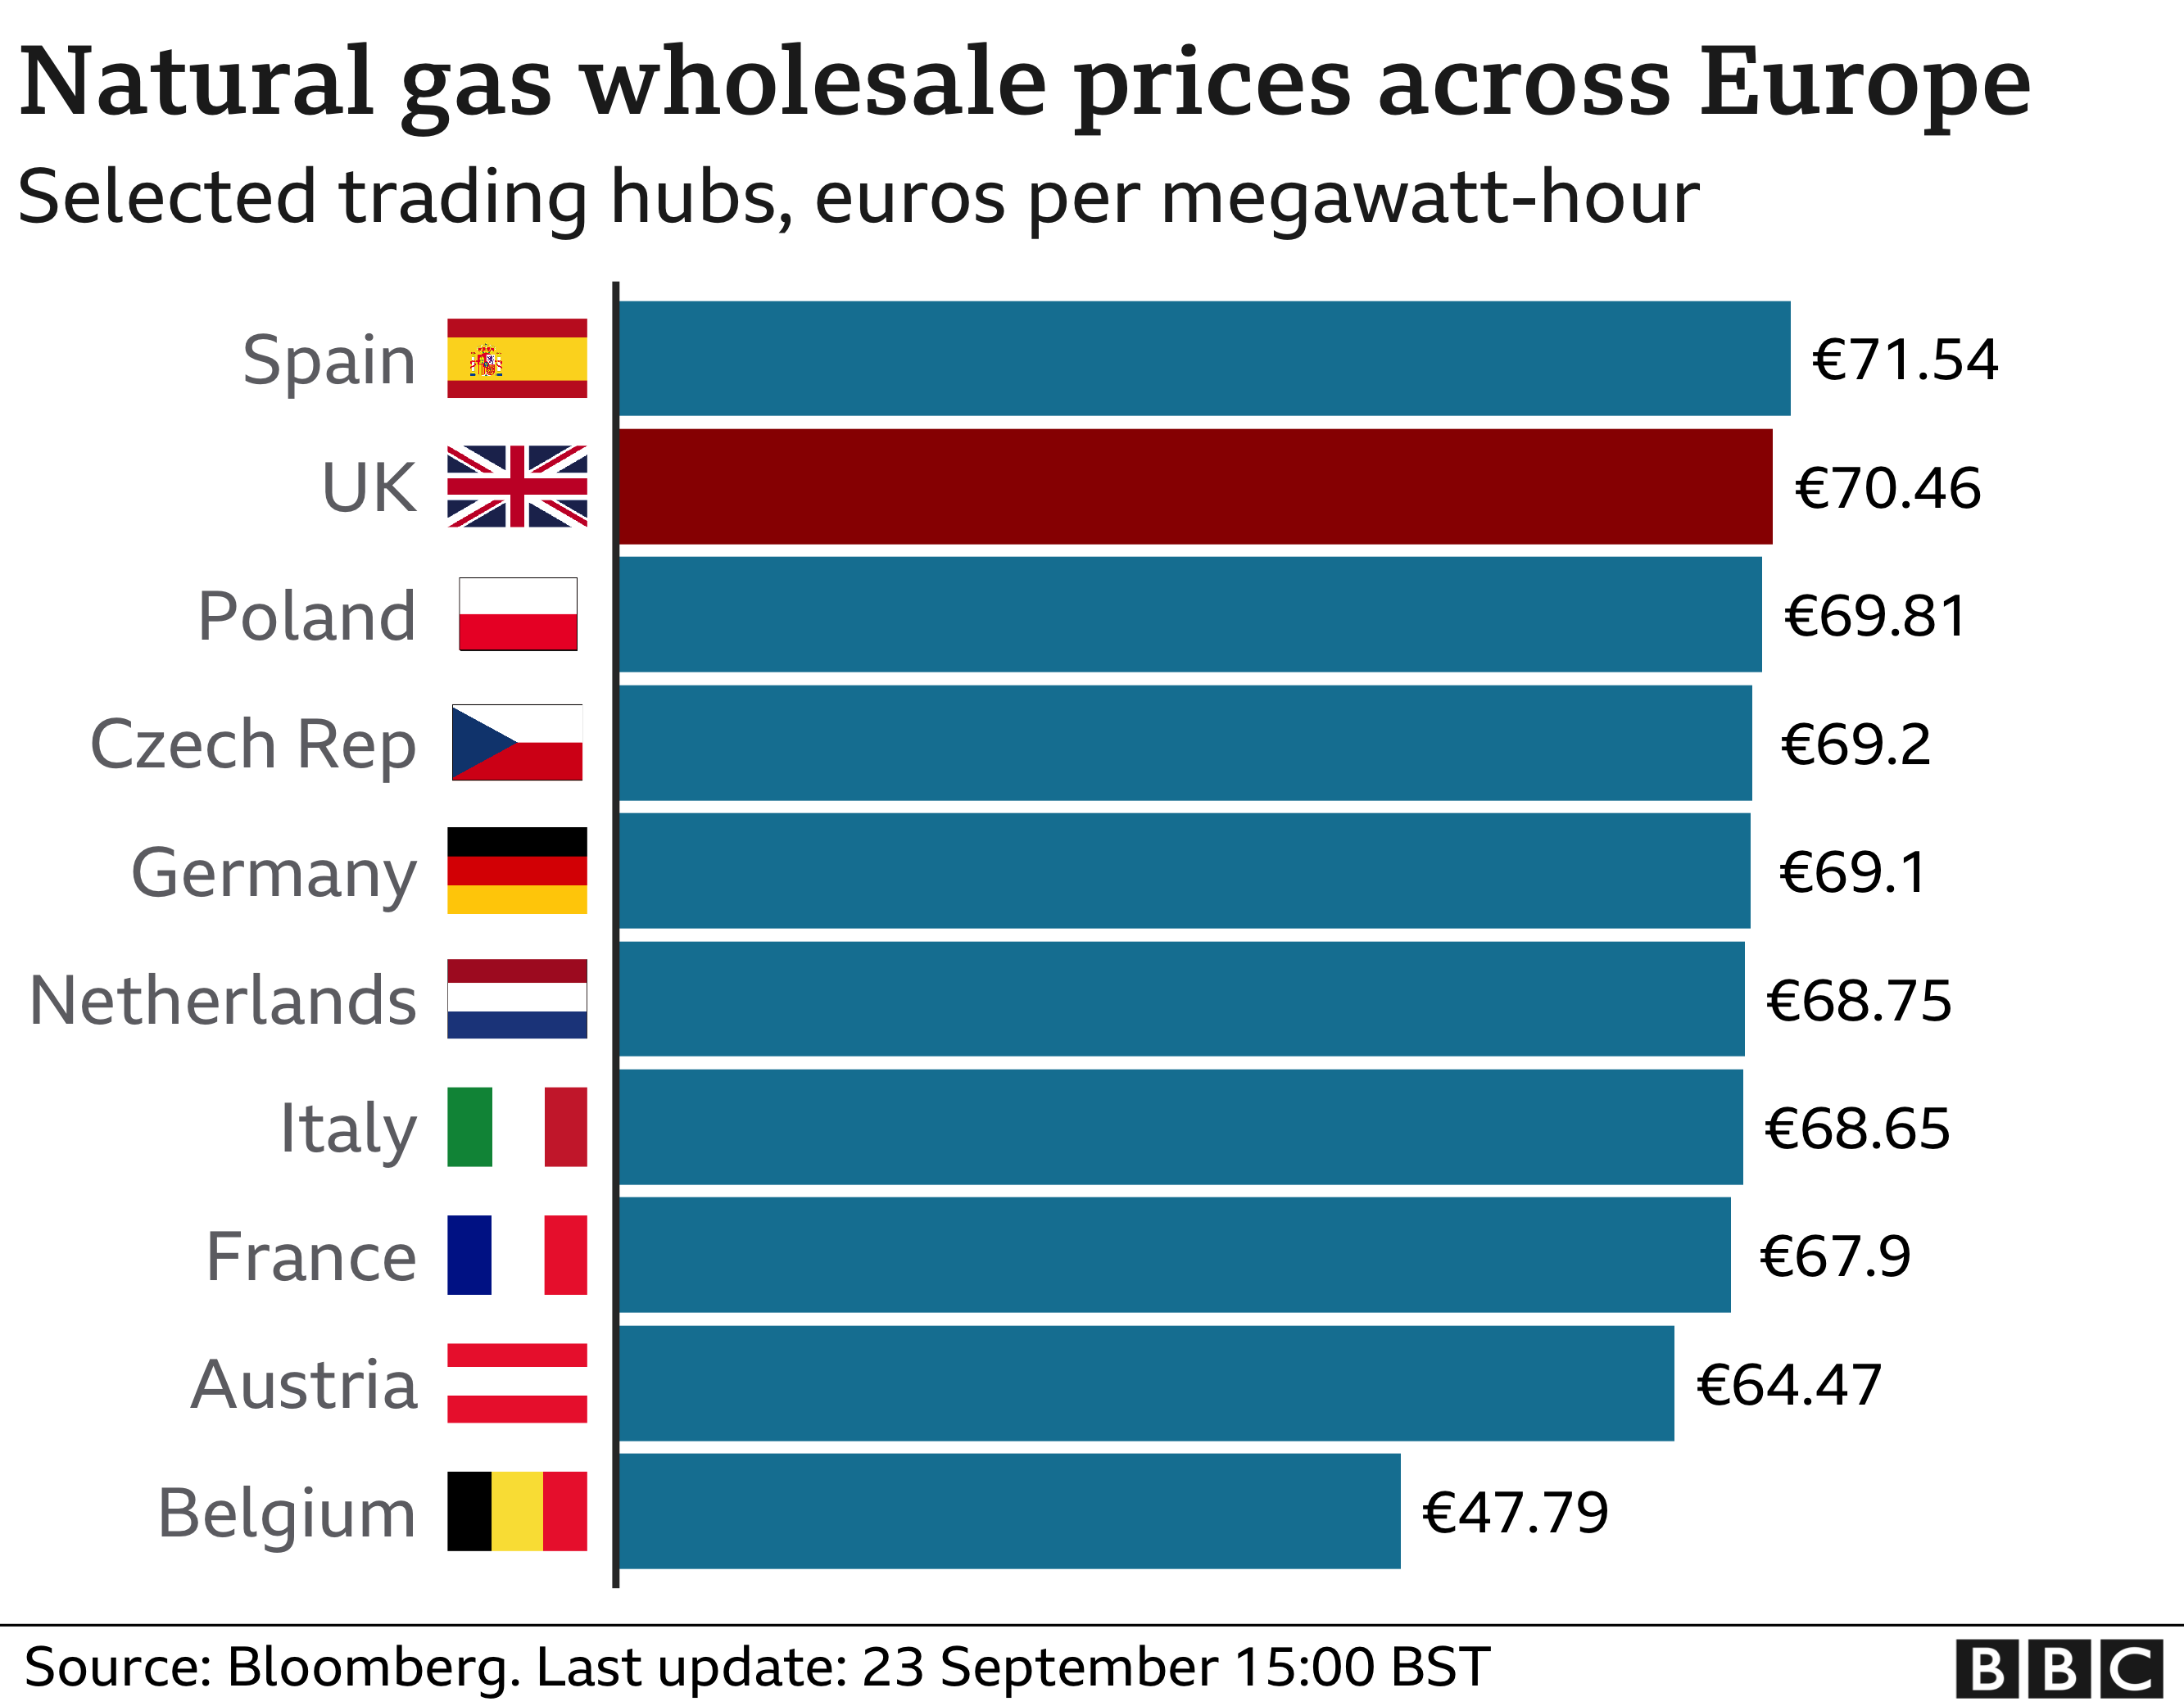 Natural gas prices across Europe